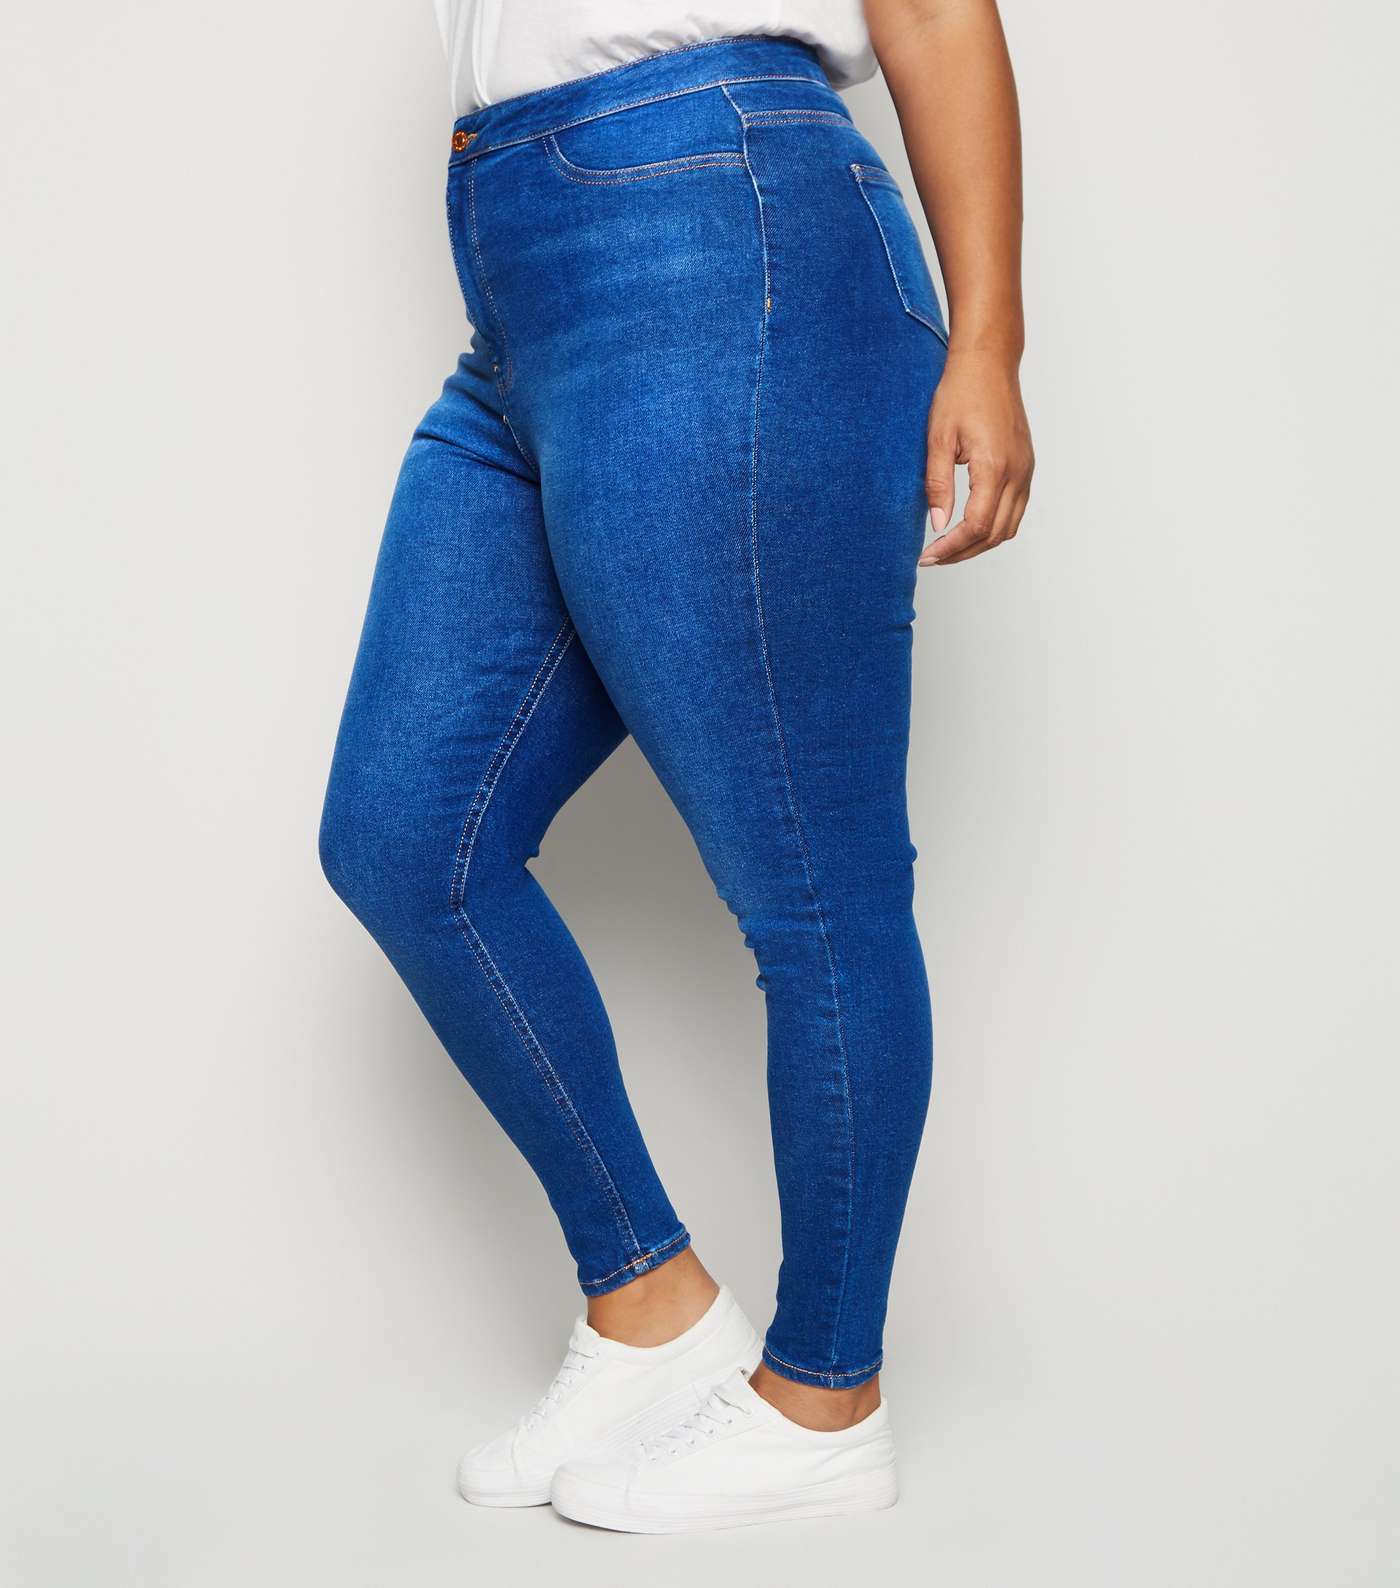 Curves Bright Blue High Waist Skinny Jeans Image 3